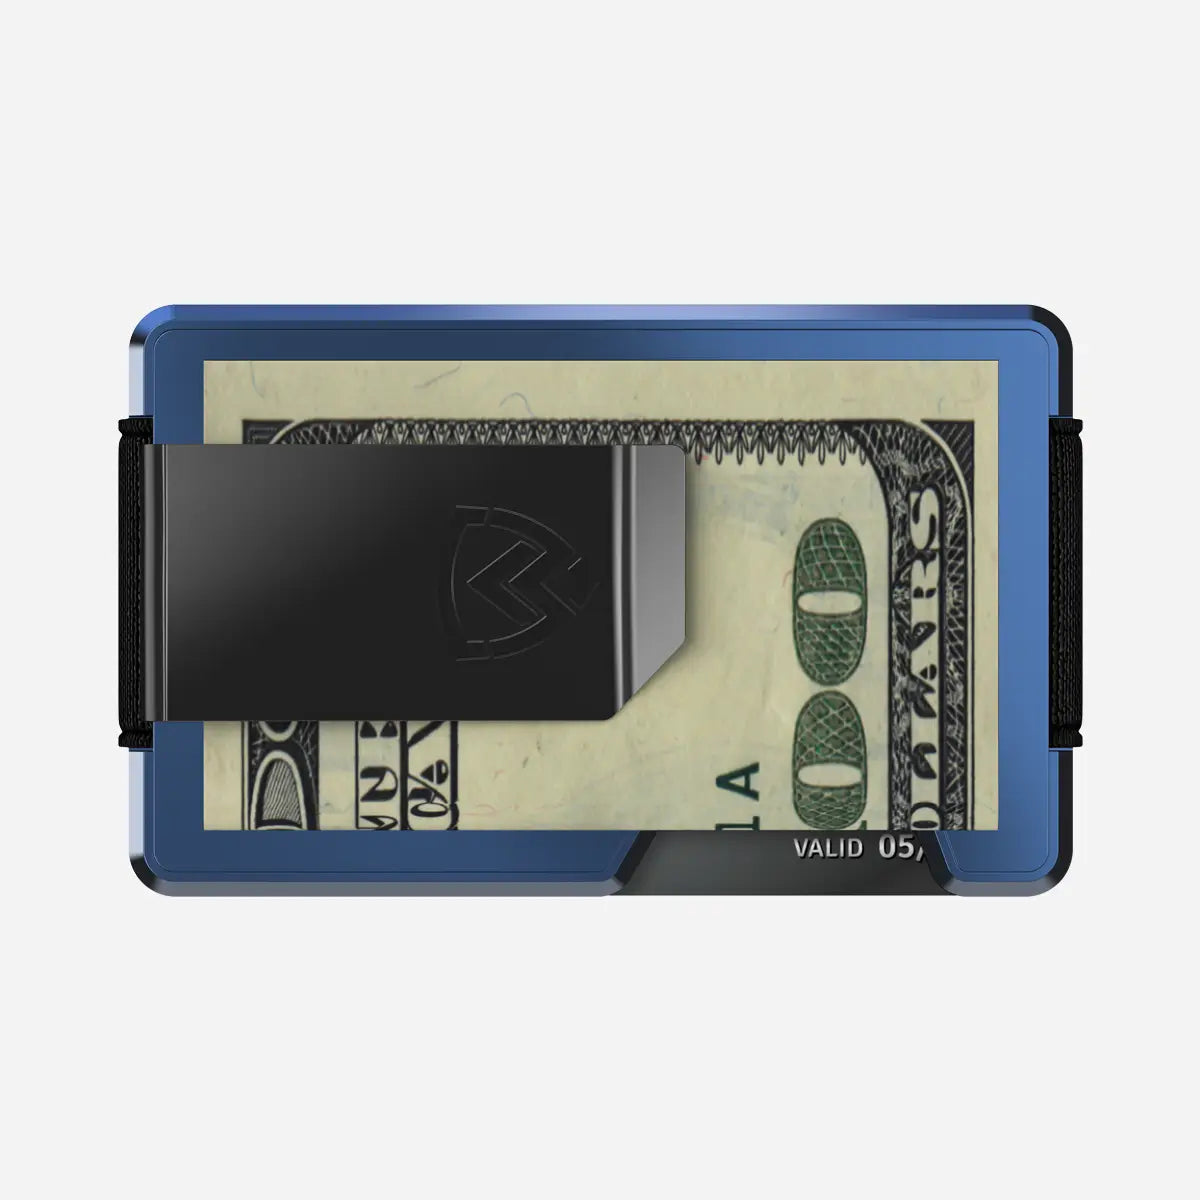 Axwell Navy Blue AirTag Wallet